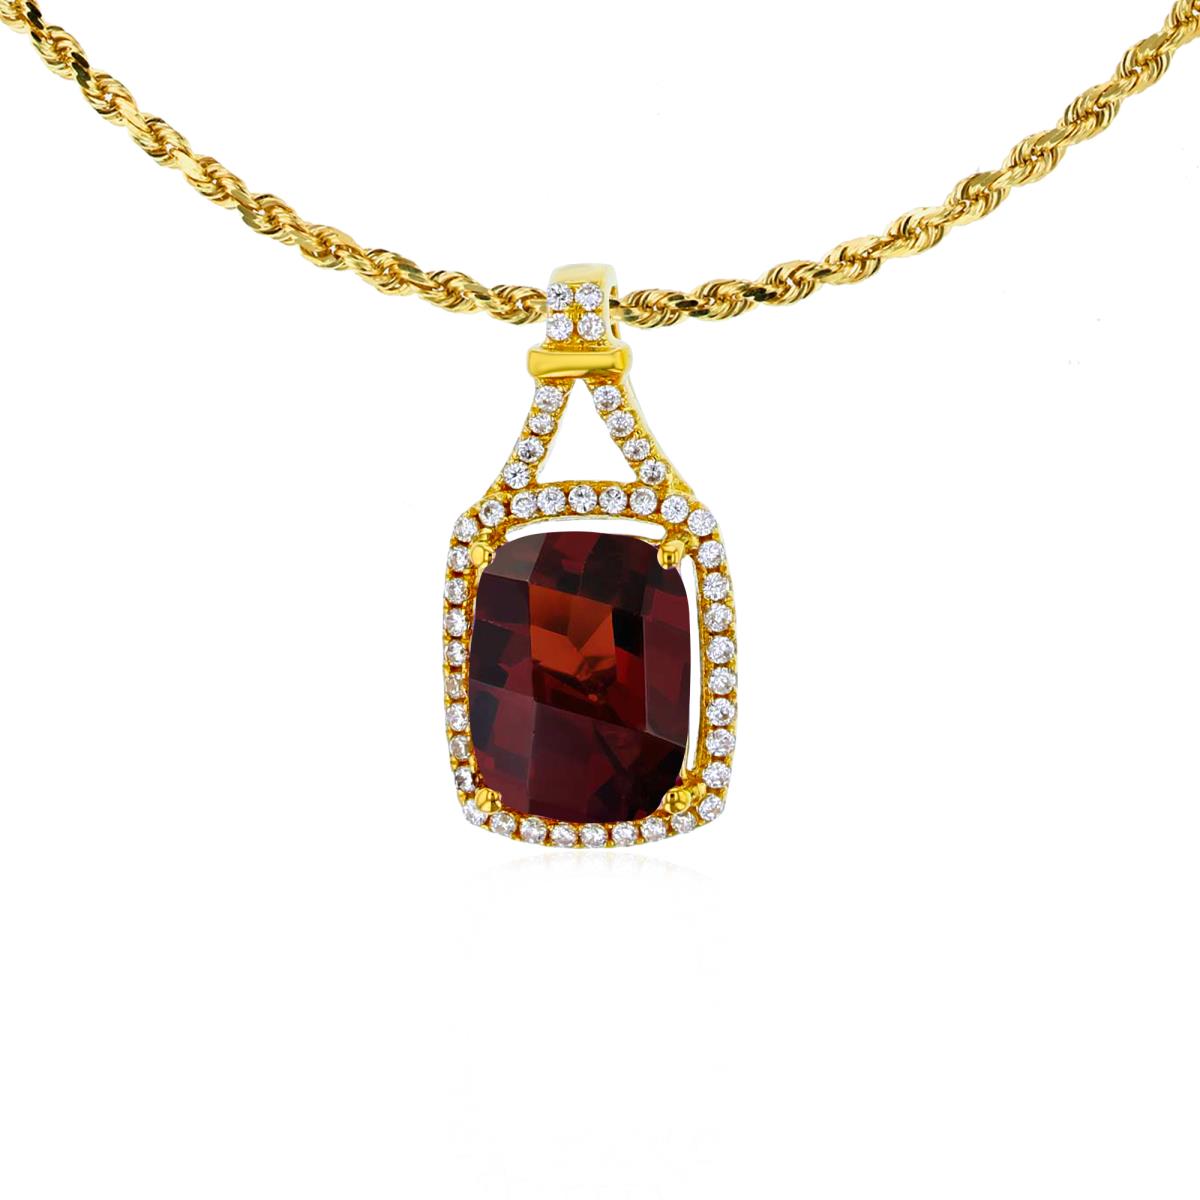 10K Yellow Gold 8x6mm Cushion Garnet & 0.13 CTTW Rd Diamonds Halo 18" Rope Chain Necklace